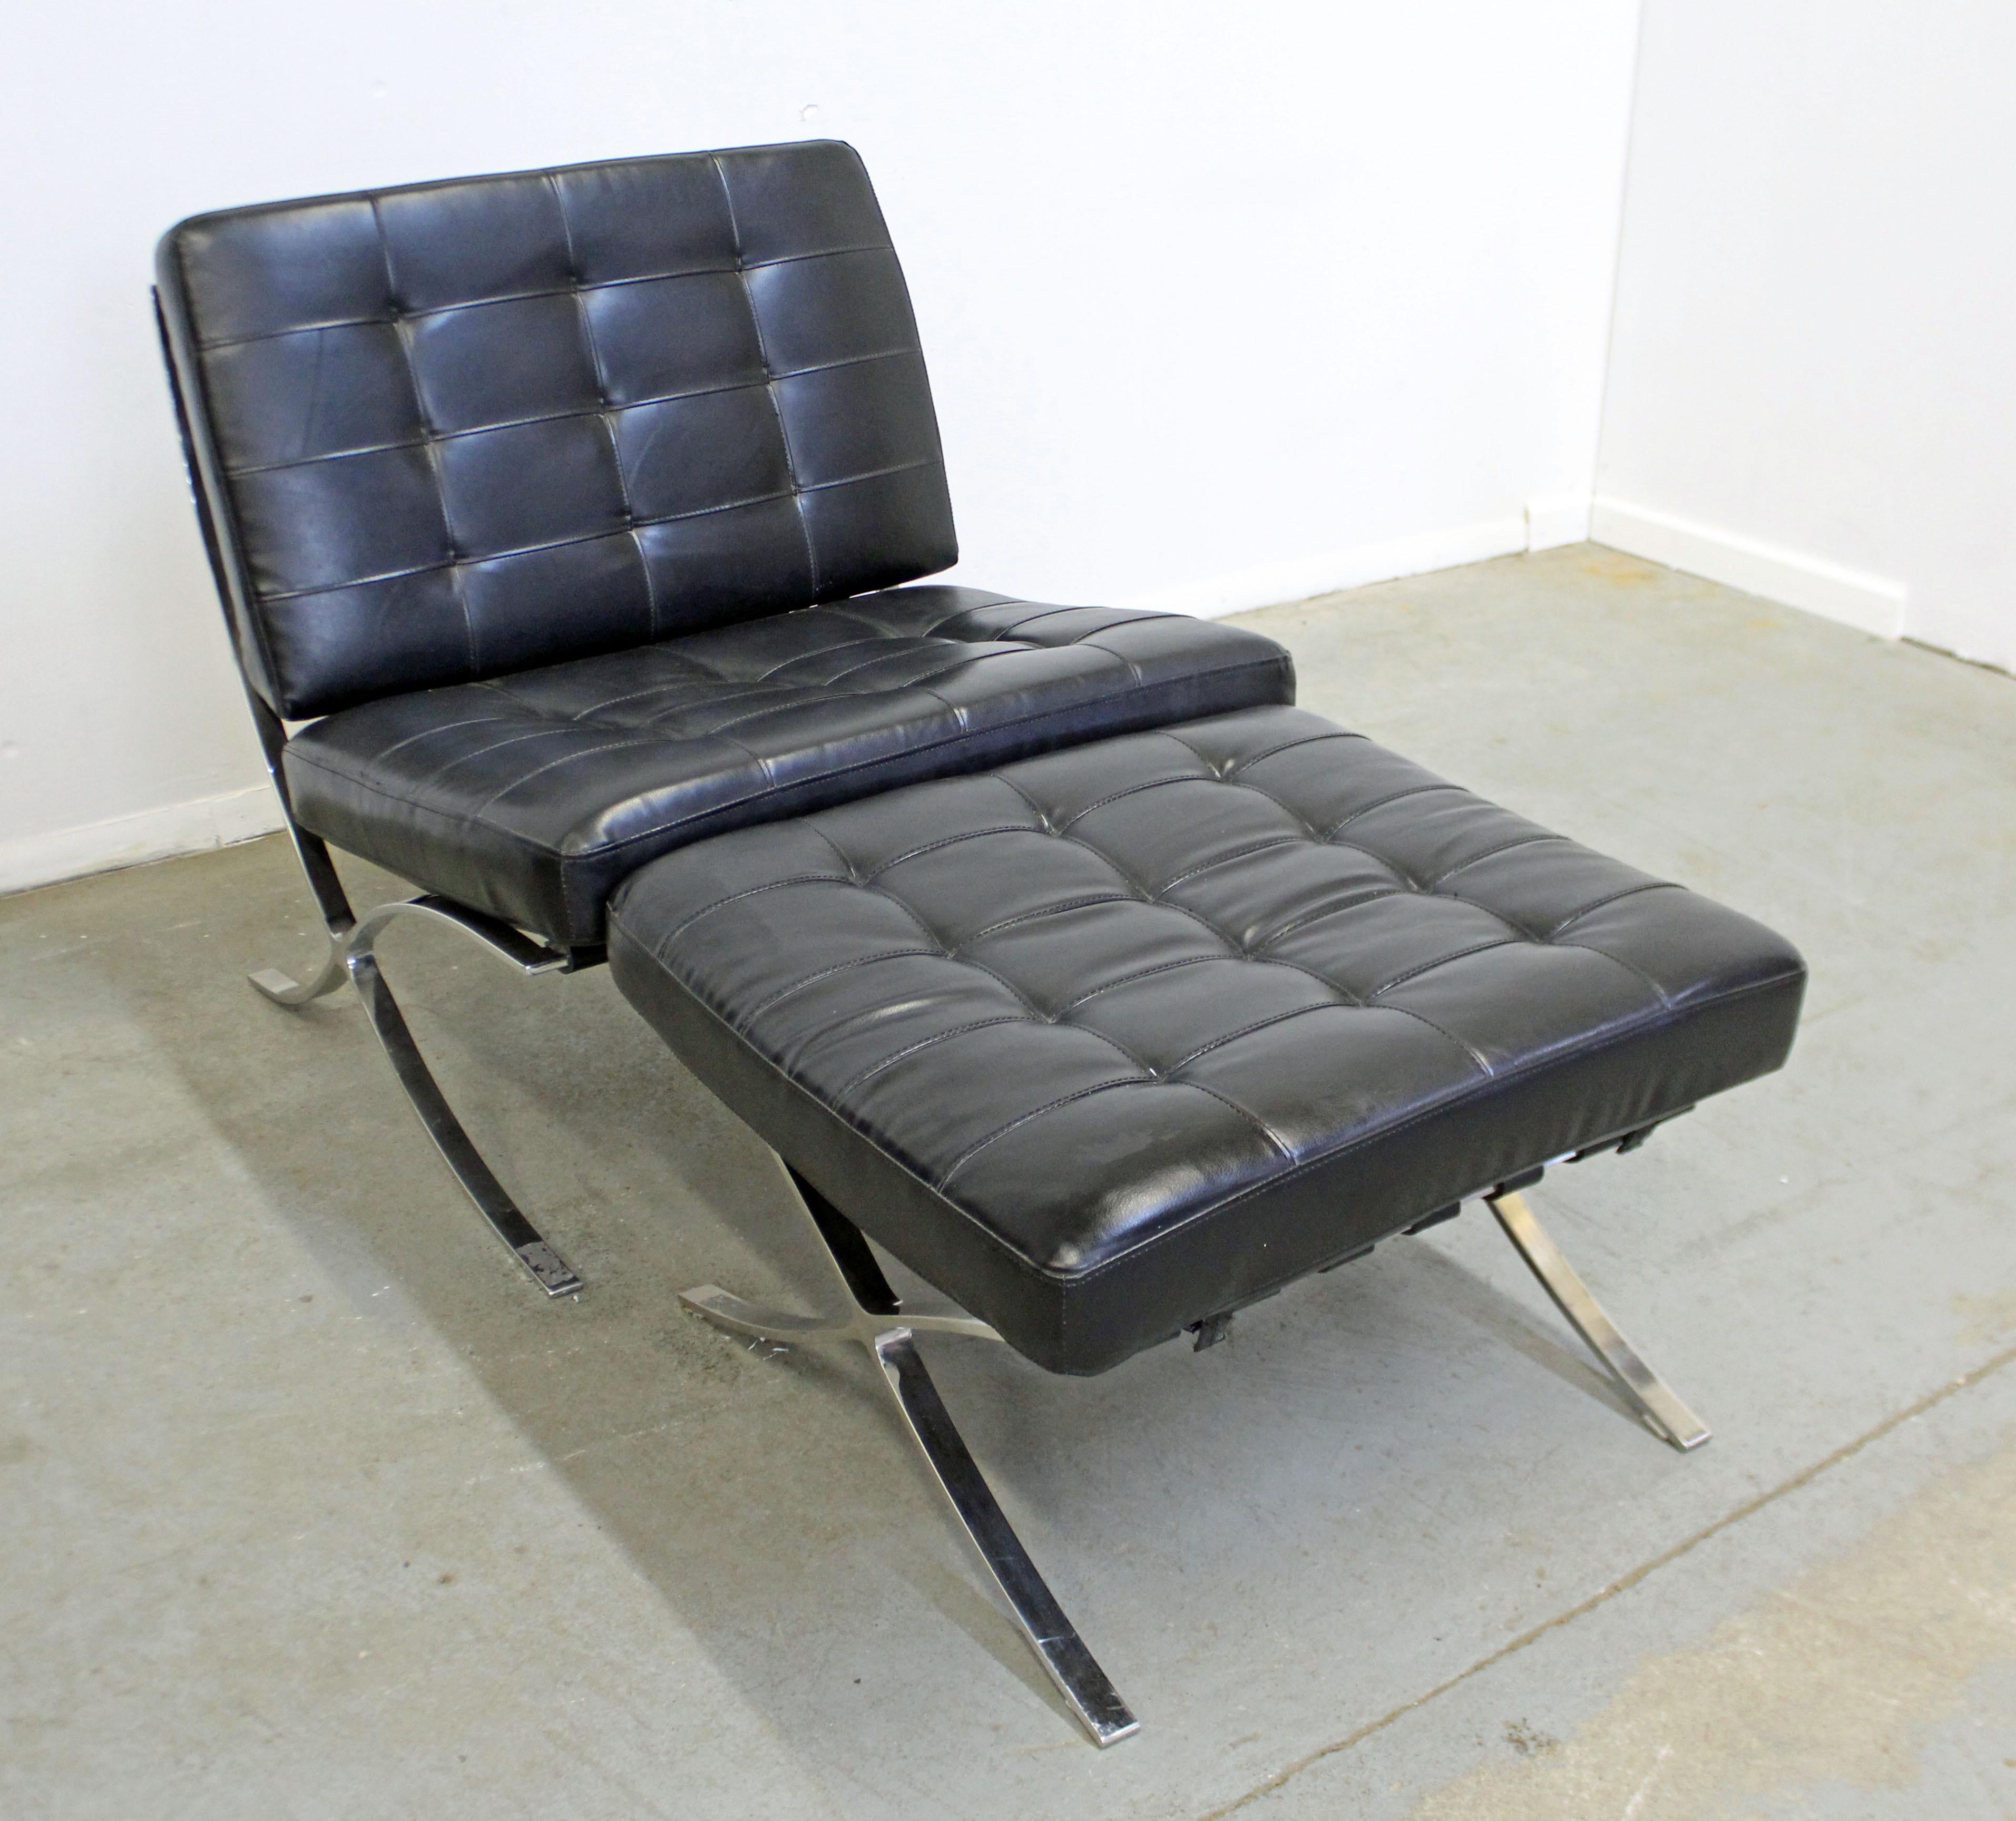 Offered is a Mid-Century Modern Barcelona style lounge chair with a chrome frame and leather cushions & a matching ottoman. It is in good condition for its age, shows slight age wear (slight wear on upholstery, strapping is usable, scratches/wear on